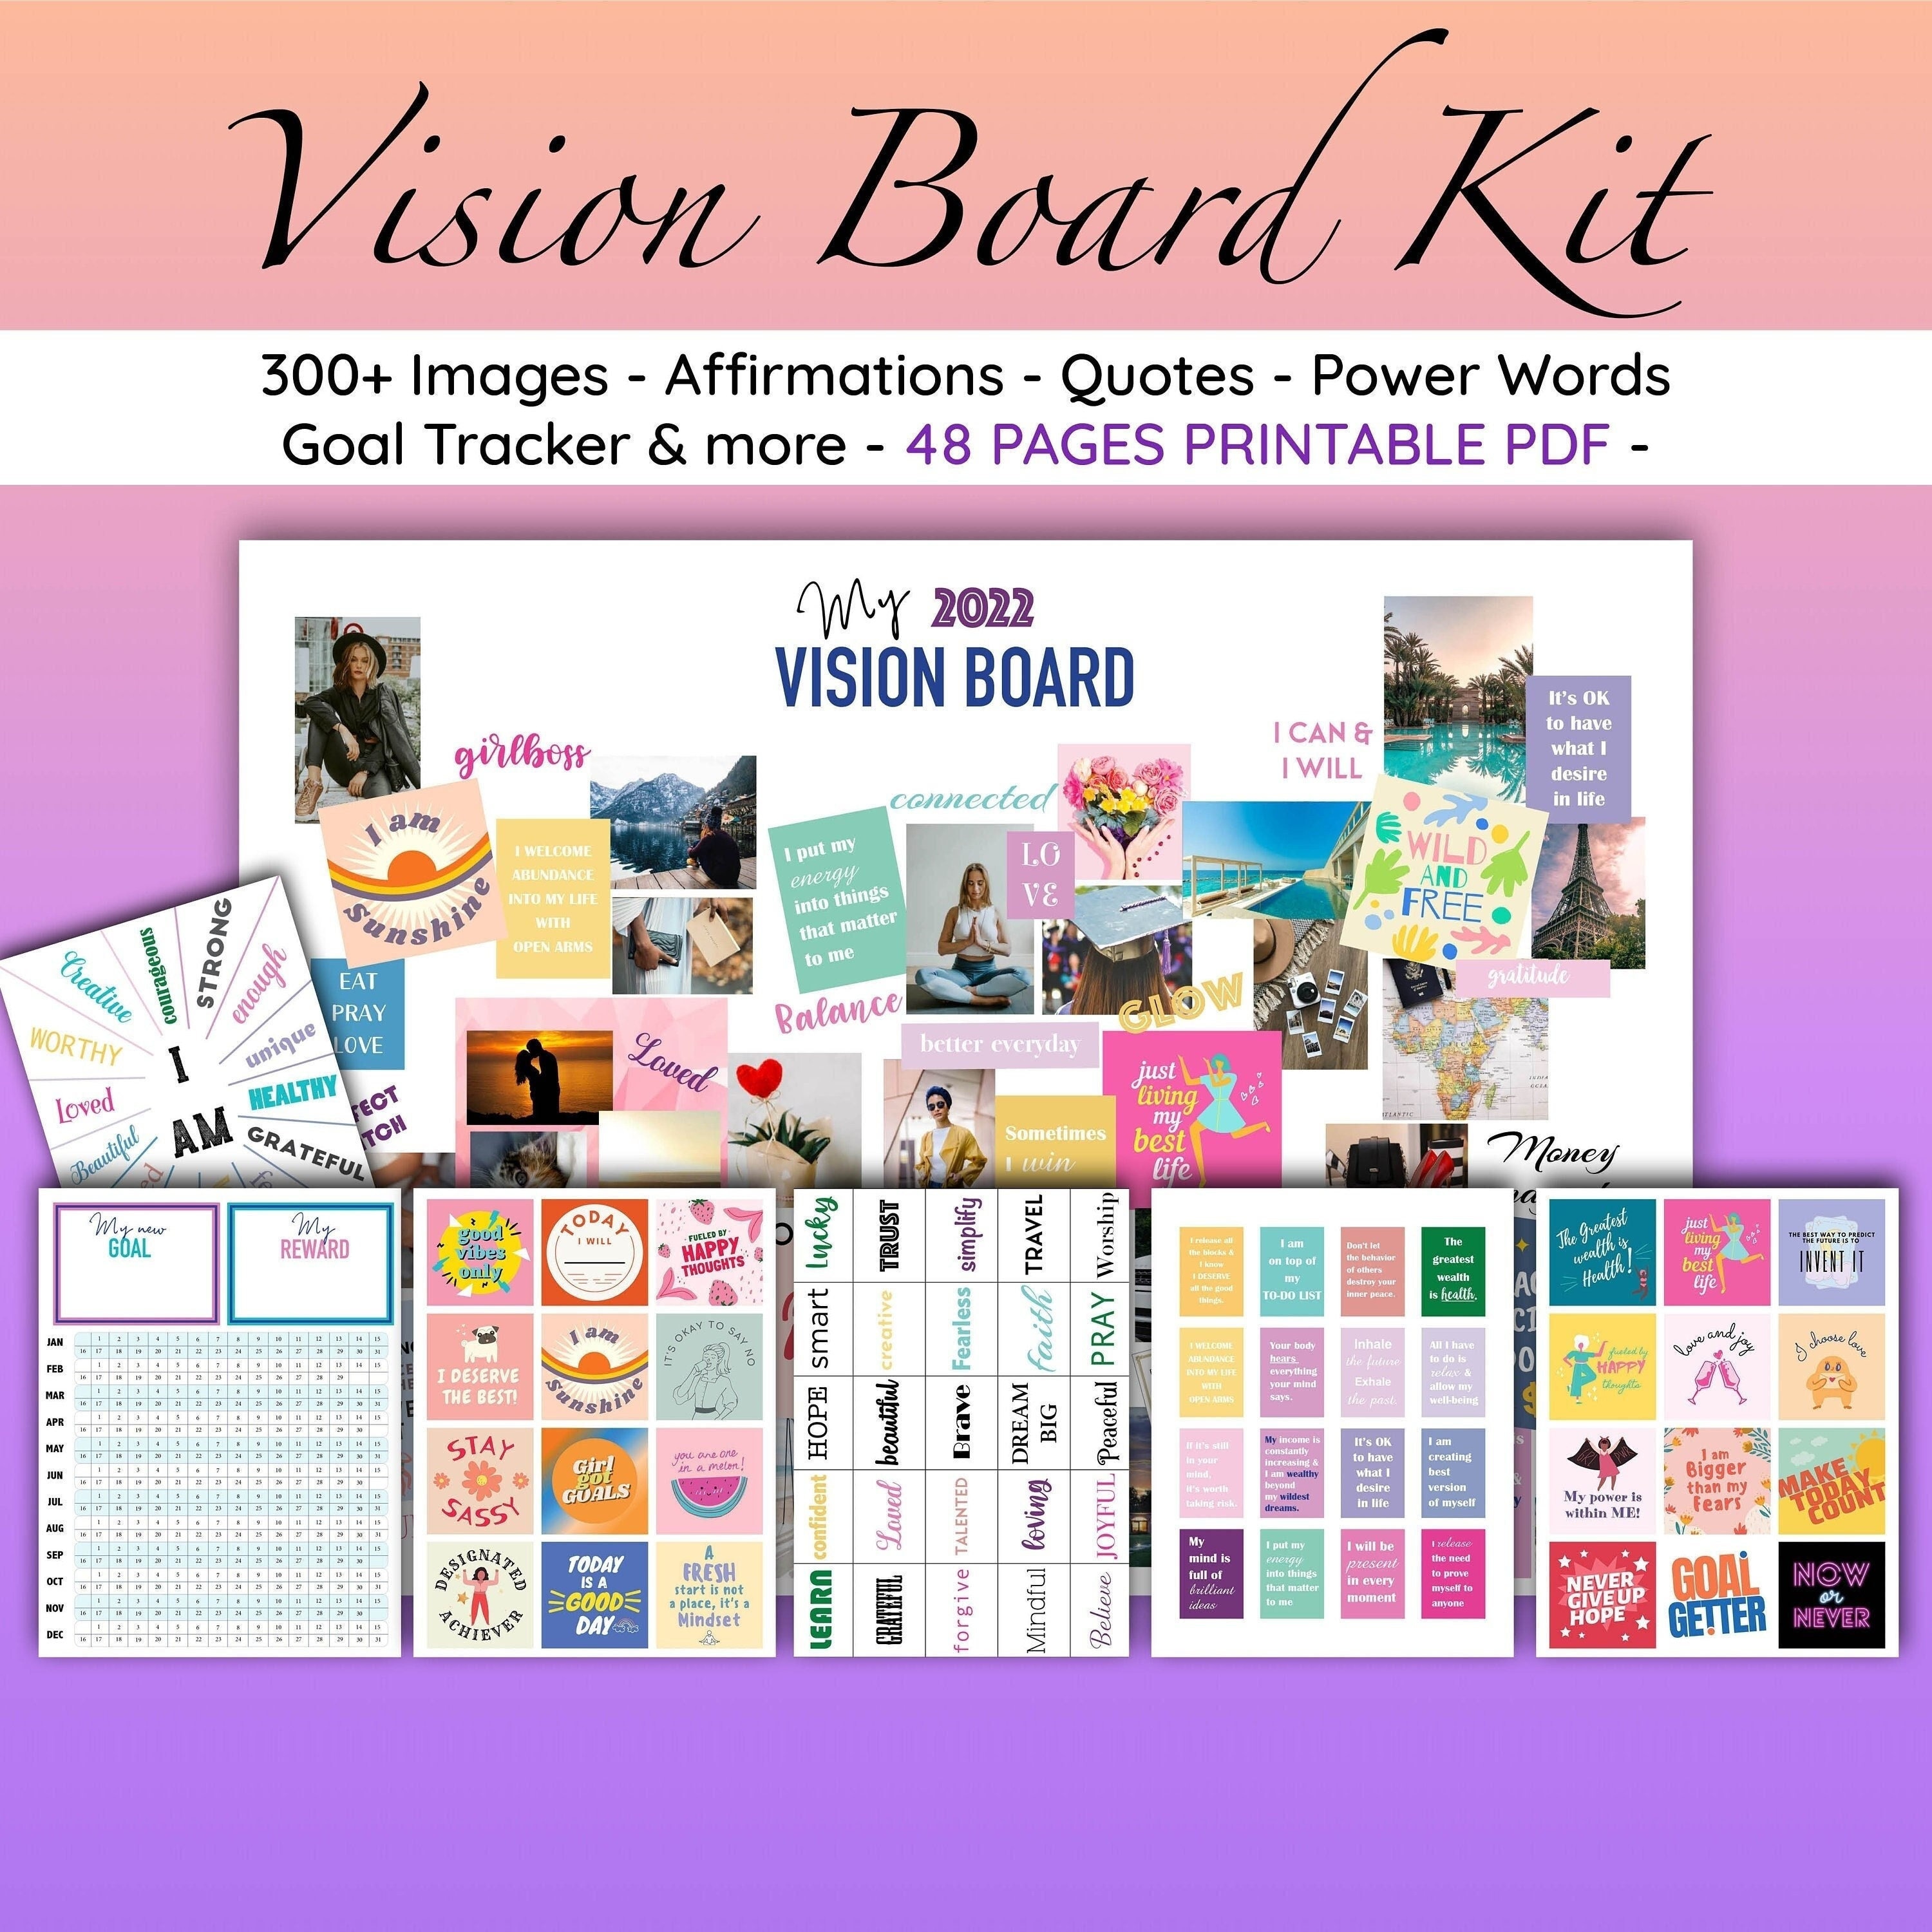 Creating Vision Boards – The Best is Yet to Come